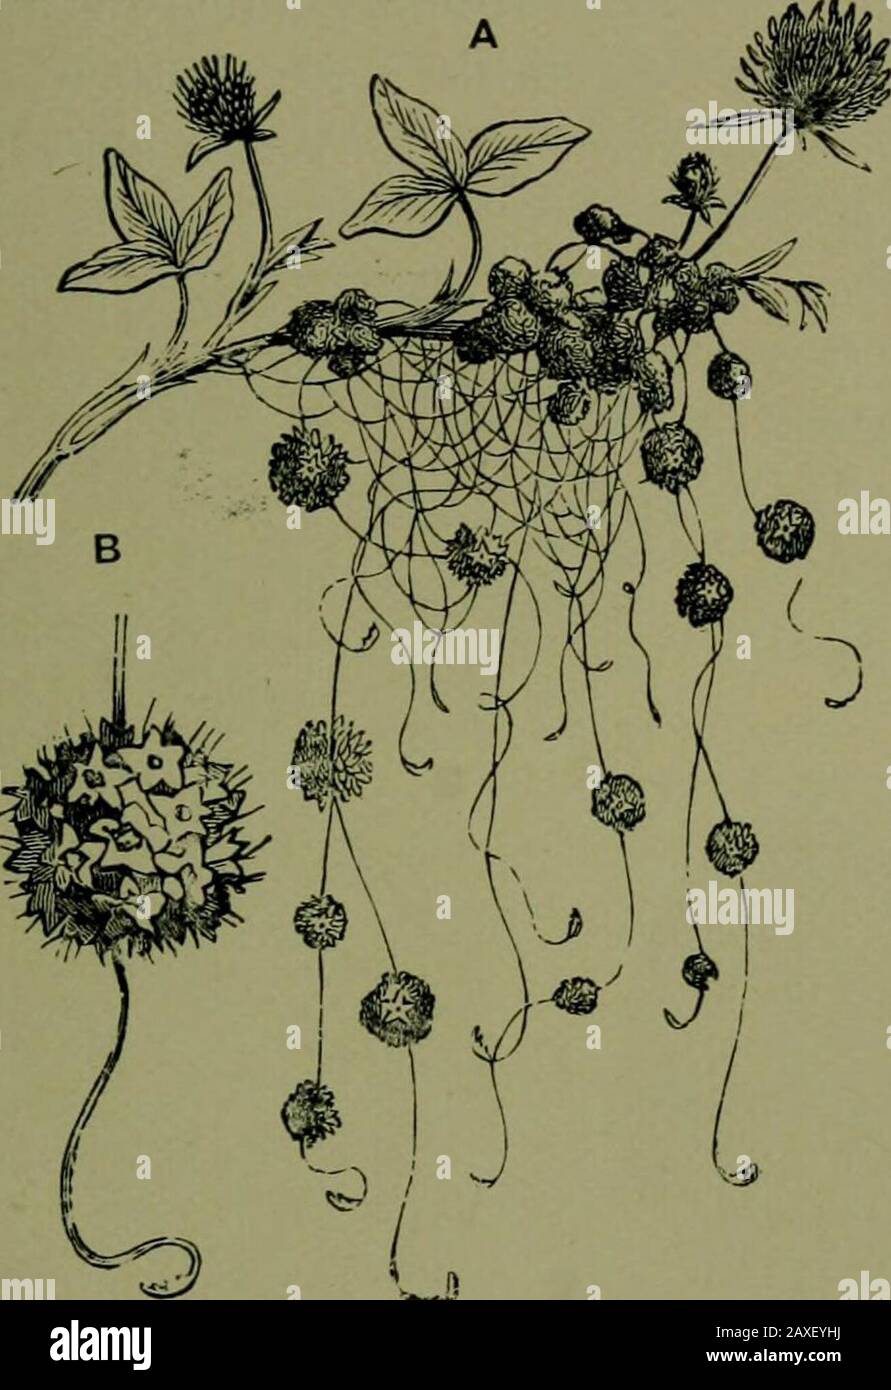 Plants and their ways in South Africa . grainwhich is rust proof, for it has been found that certain varietiesof grain are resistant to the rust fungus, the fungus threads(hyphae) are checked after entering the stomata of the resistantgrains. This remarkable discovery is of great importance tofarmers (Bififen, 1905-7). Dodder [Cuscutd) and Cassytha are parasites which havelost their leaves, roots, and most of their chlorophyll. At someseason of the year, however, Cassytha stems are quite green.Try to loosen the hold of these plants from the plants aroundwhich they are twining and they betray t Stock Photo